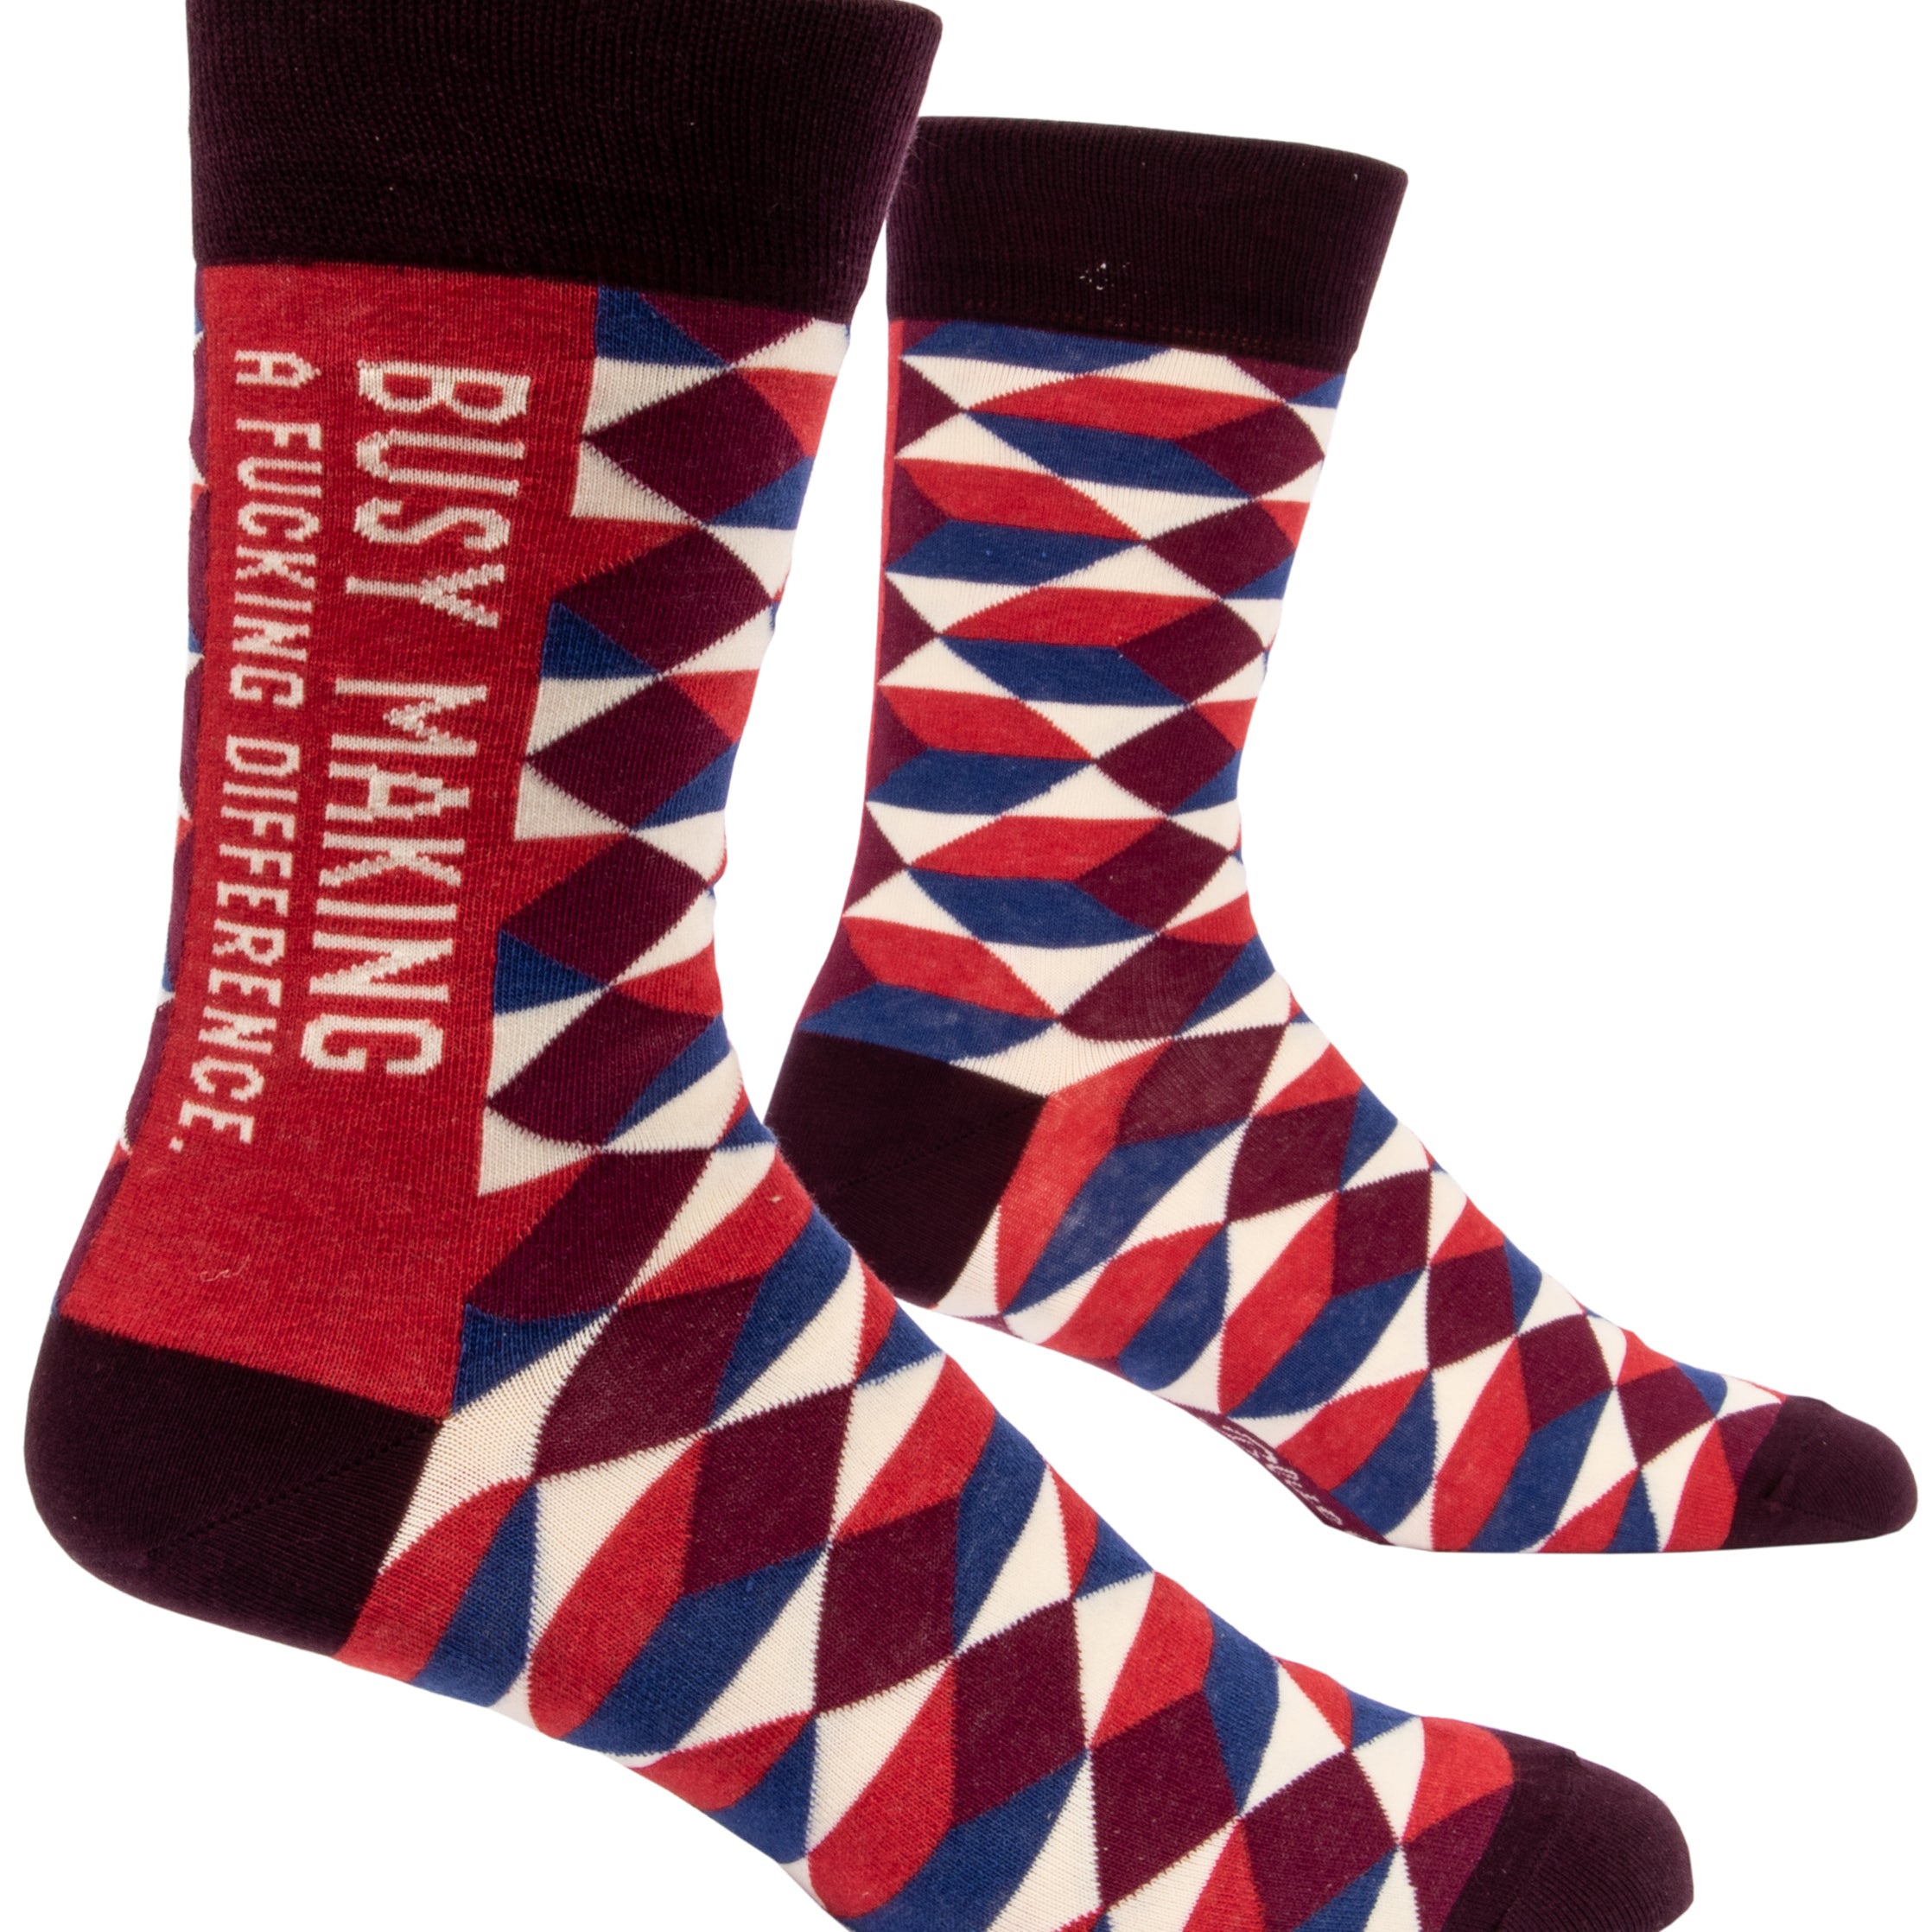 socks with retro style red, blue, white and brown diamond pattern on ankle says busy making a fucking differance